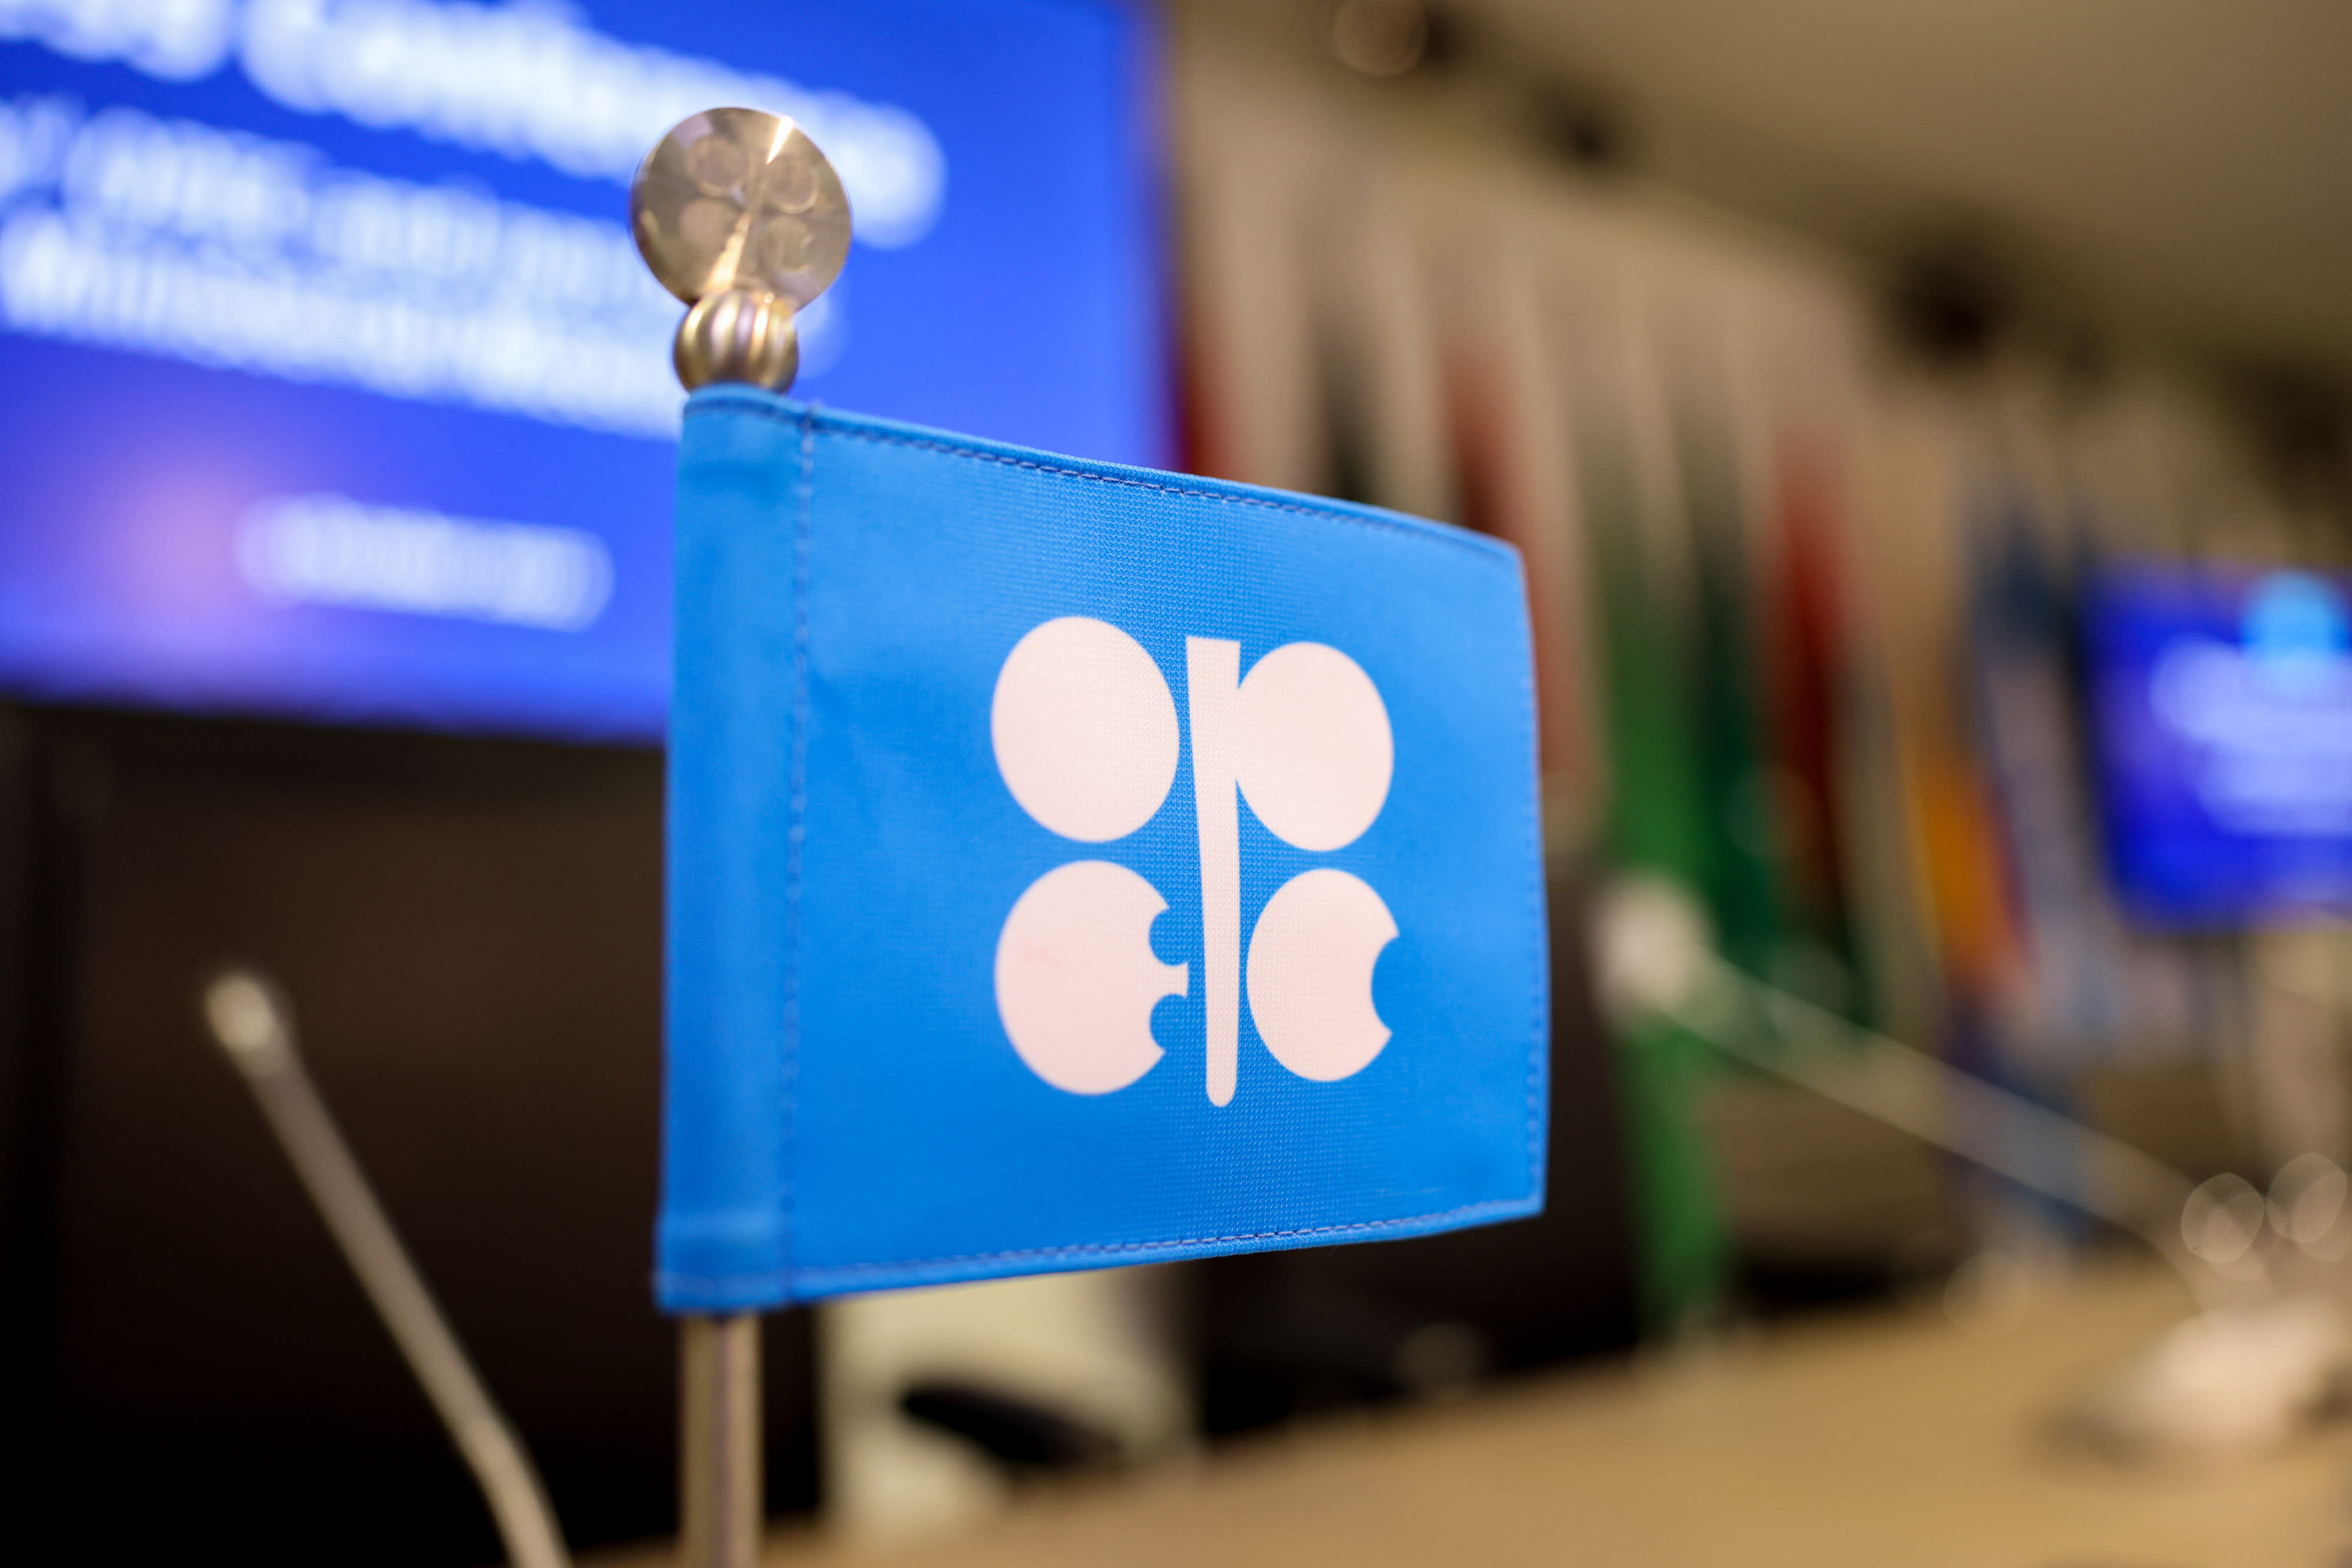 Oil: OPEC+ imposes deep production cuts in a bid to shore up prices